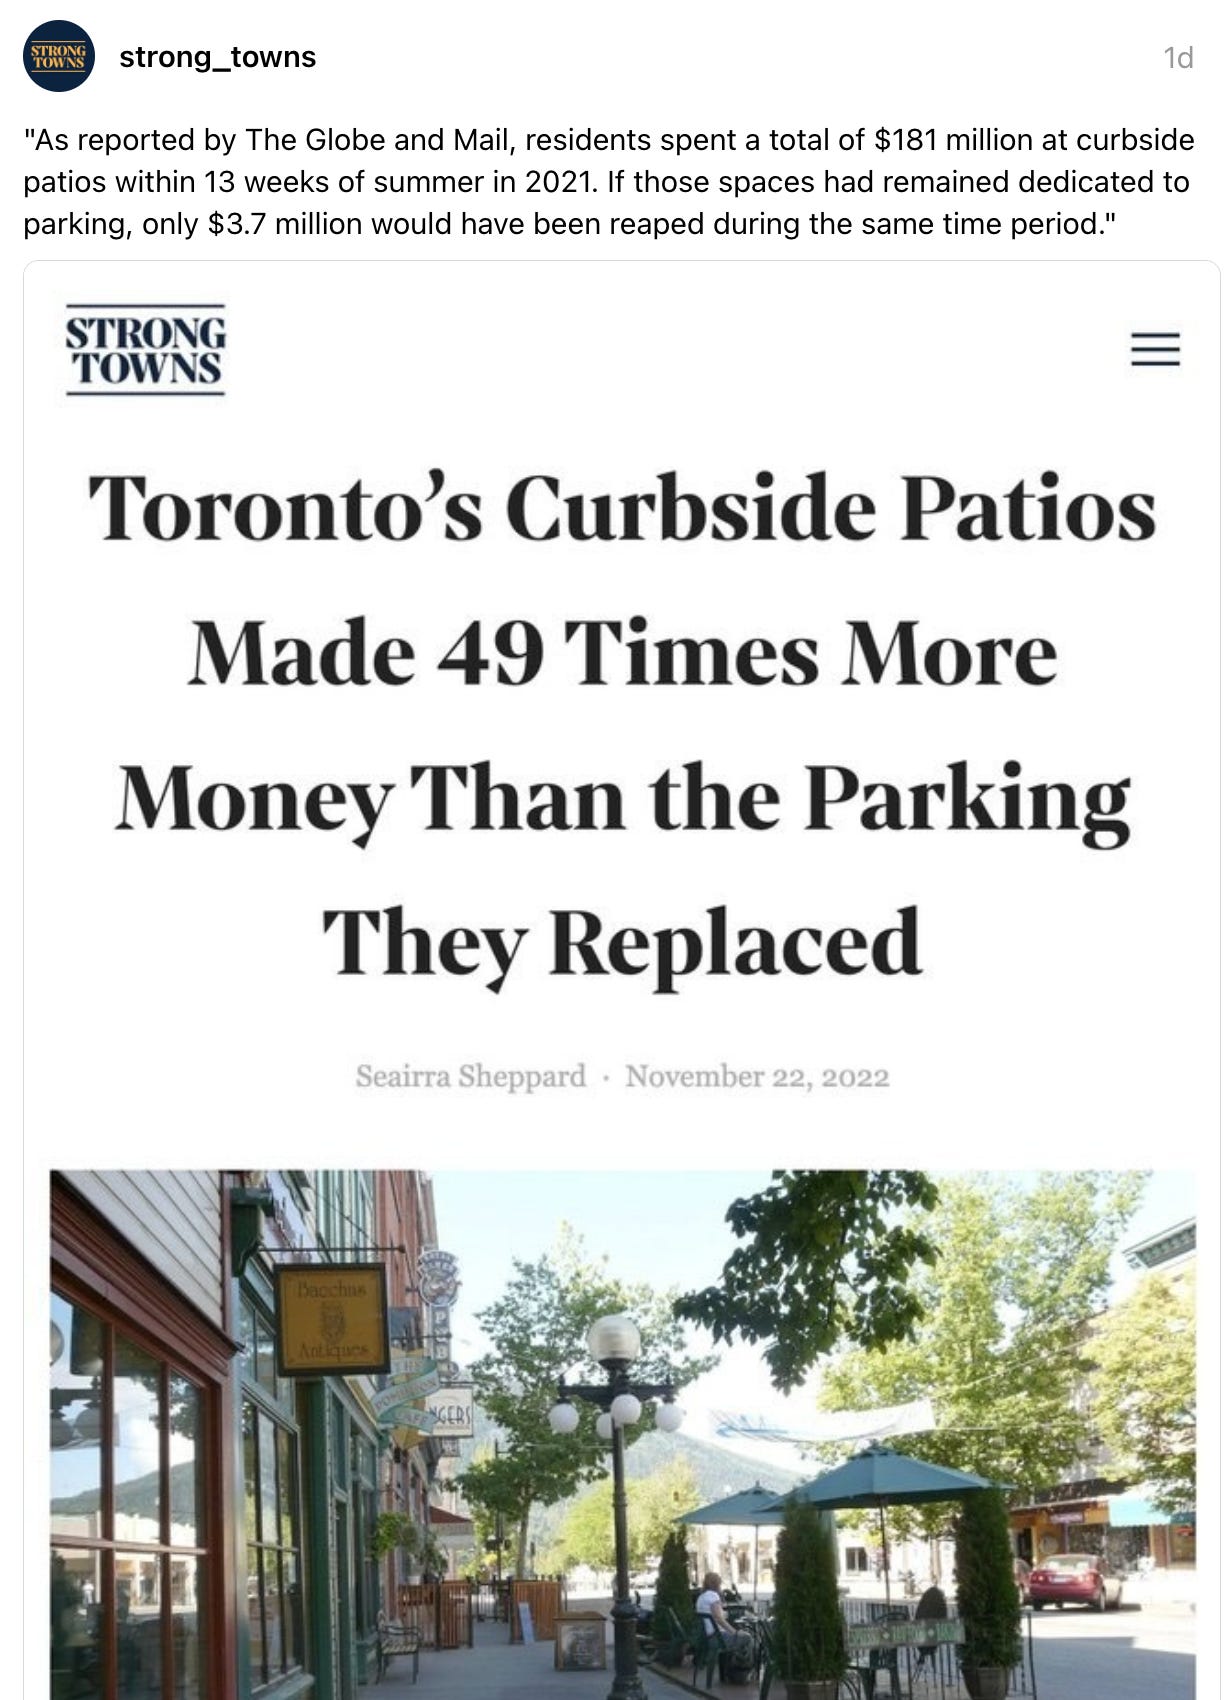  strong_towns 1d "As reported by The Globe and Mail, residents spent a total of $181 million at curbside patios within 13 weeks of summer in 2021. If those spaces had remained dedicated to parking, only $3.7 million would have been reaped during the same time period."